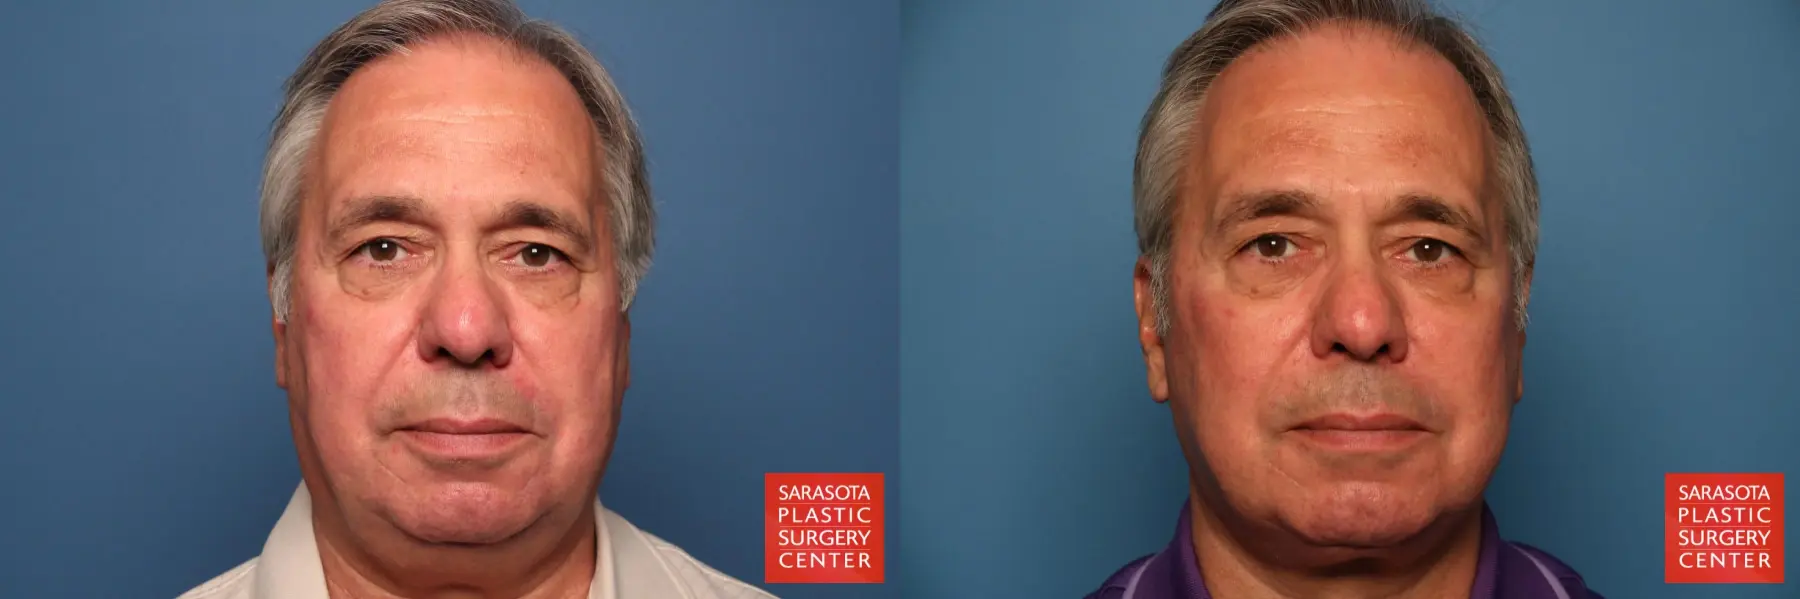 Facelift - Male: Patient 4 - Before and After  